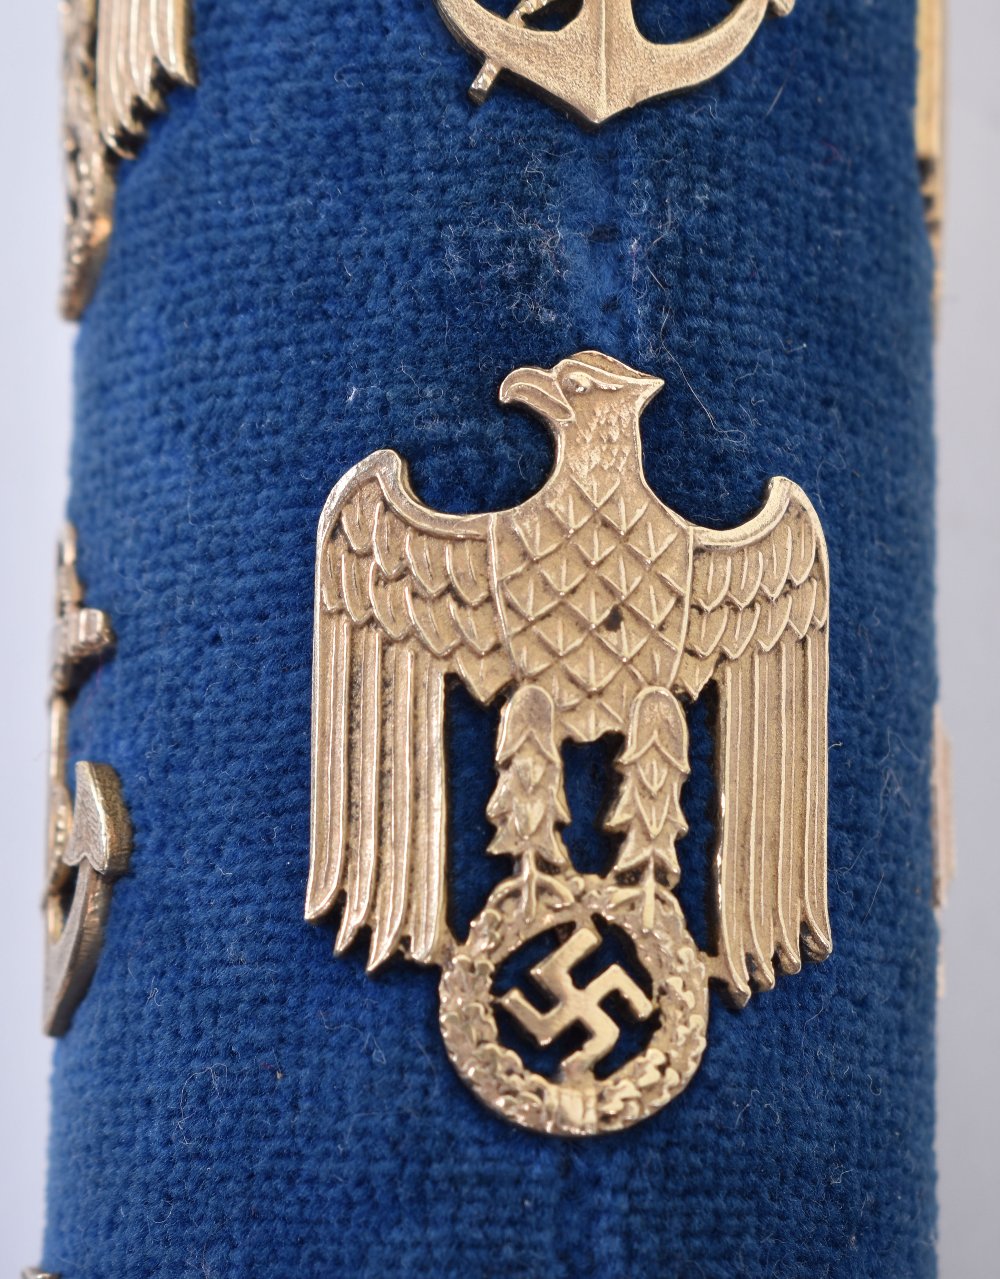 Grand Admirals Baton Given to Grand Admiral Karl Donitz in the Post War Years to Replace the Origina - Image 2 of 23